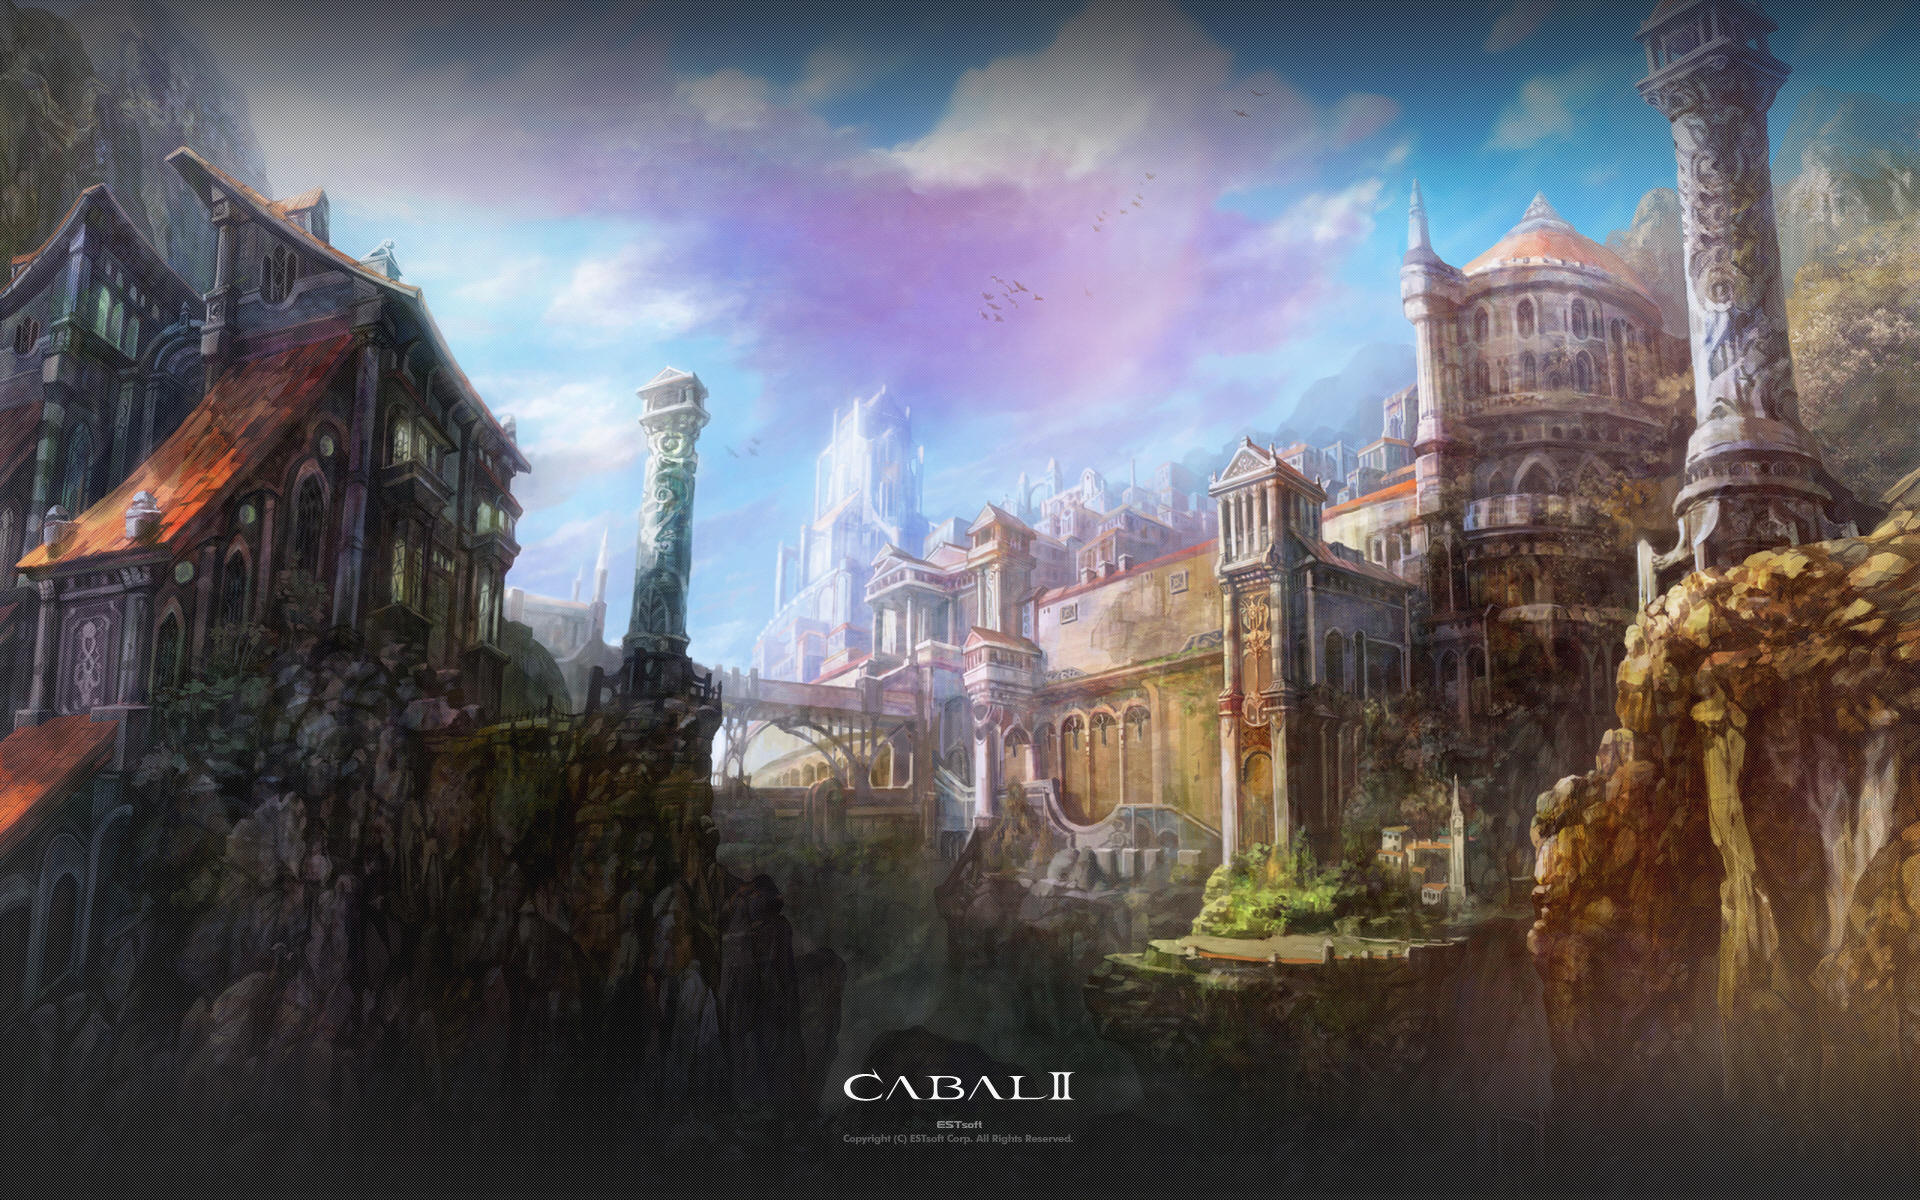 Cabal Online Wallpapers